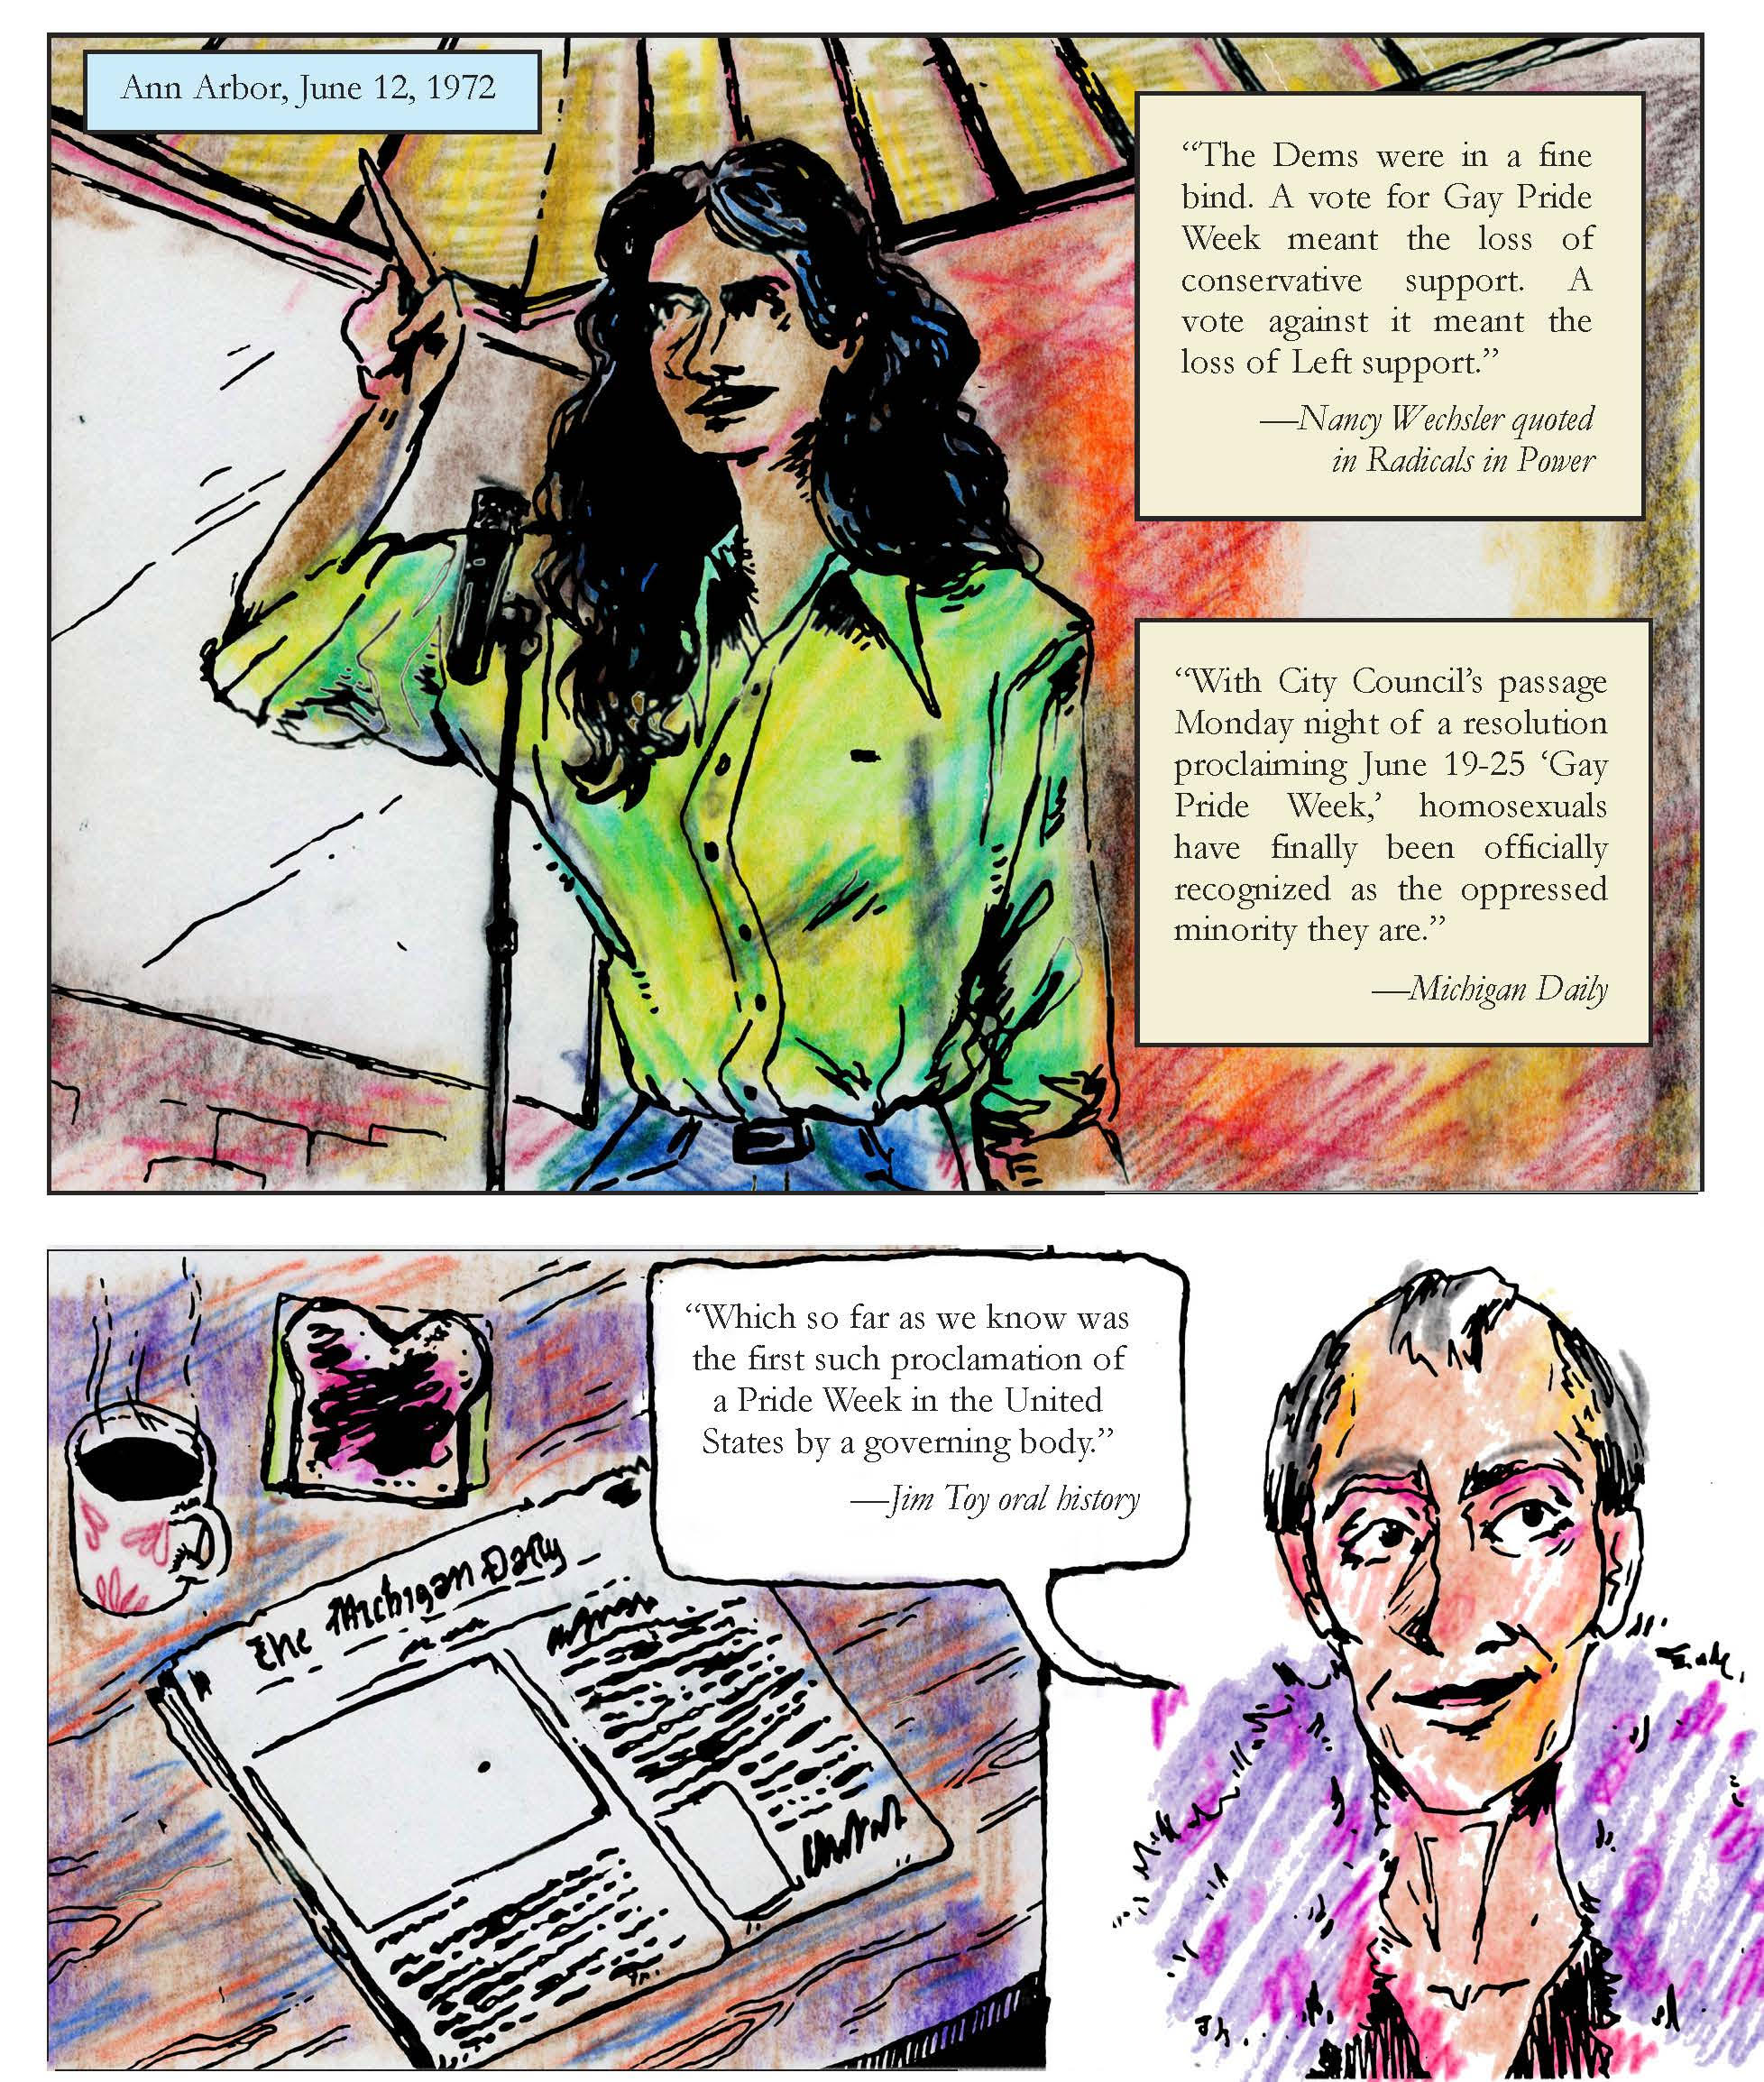 A page from Come Out! In Detroit with 3 panels. The first, labeled Ann Arbor, June 12, features a woman with black hair in a green-yellow shirt giving a speech at a microphone, and has two quotes. “The Dems were in a fine bind. A vote for Gay Pride Week meant the loss of conservative support. A vote against it meant the loss of Left support” (Nancy Wechsler quoted in Radicals in Power). “With City Council’s passage Monday night of a resolution proclaiming June 19-25 ‘Gay Pride Week,’ homosexuals have finally been officially recognized as the oppressed minority they are” (Michigan Daily). The second and third panel feature a copy of the Michigan Daily and a balding man in a purple feather boa saying, “Which so far as we know was the first such proclamation of a Pride Week in the United States by a governing body” (Jim Toy oral history).